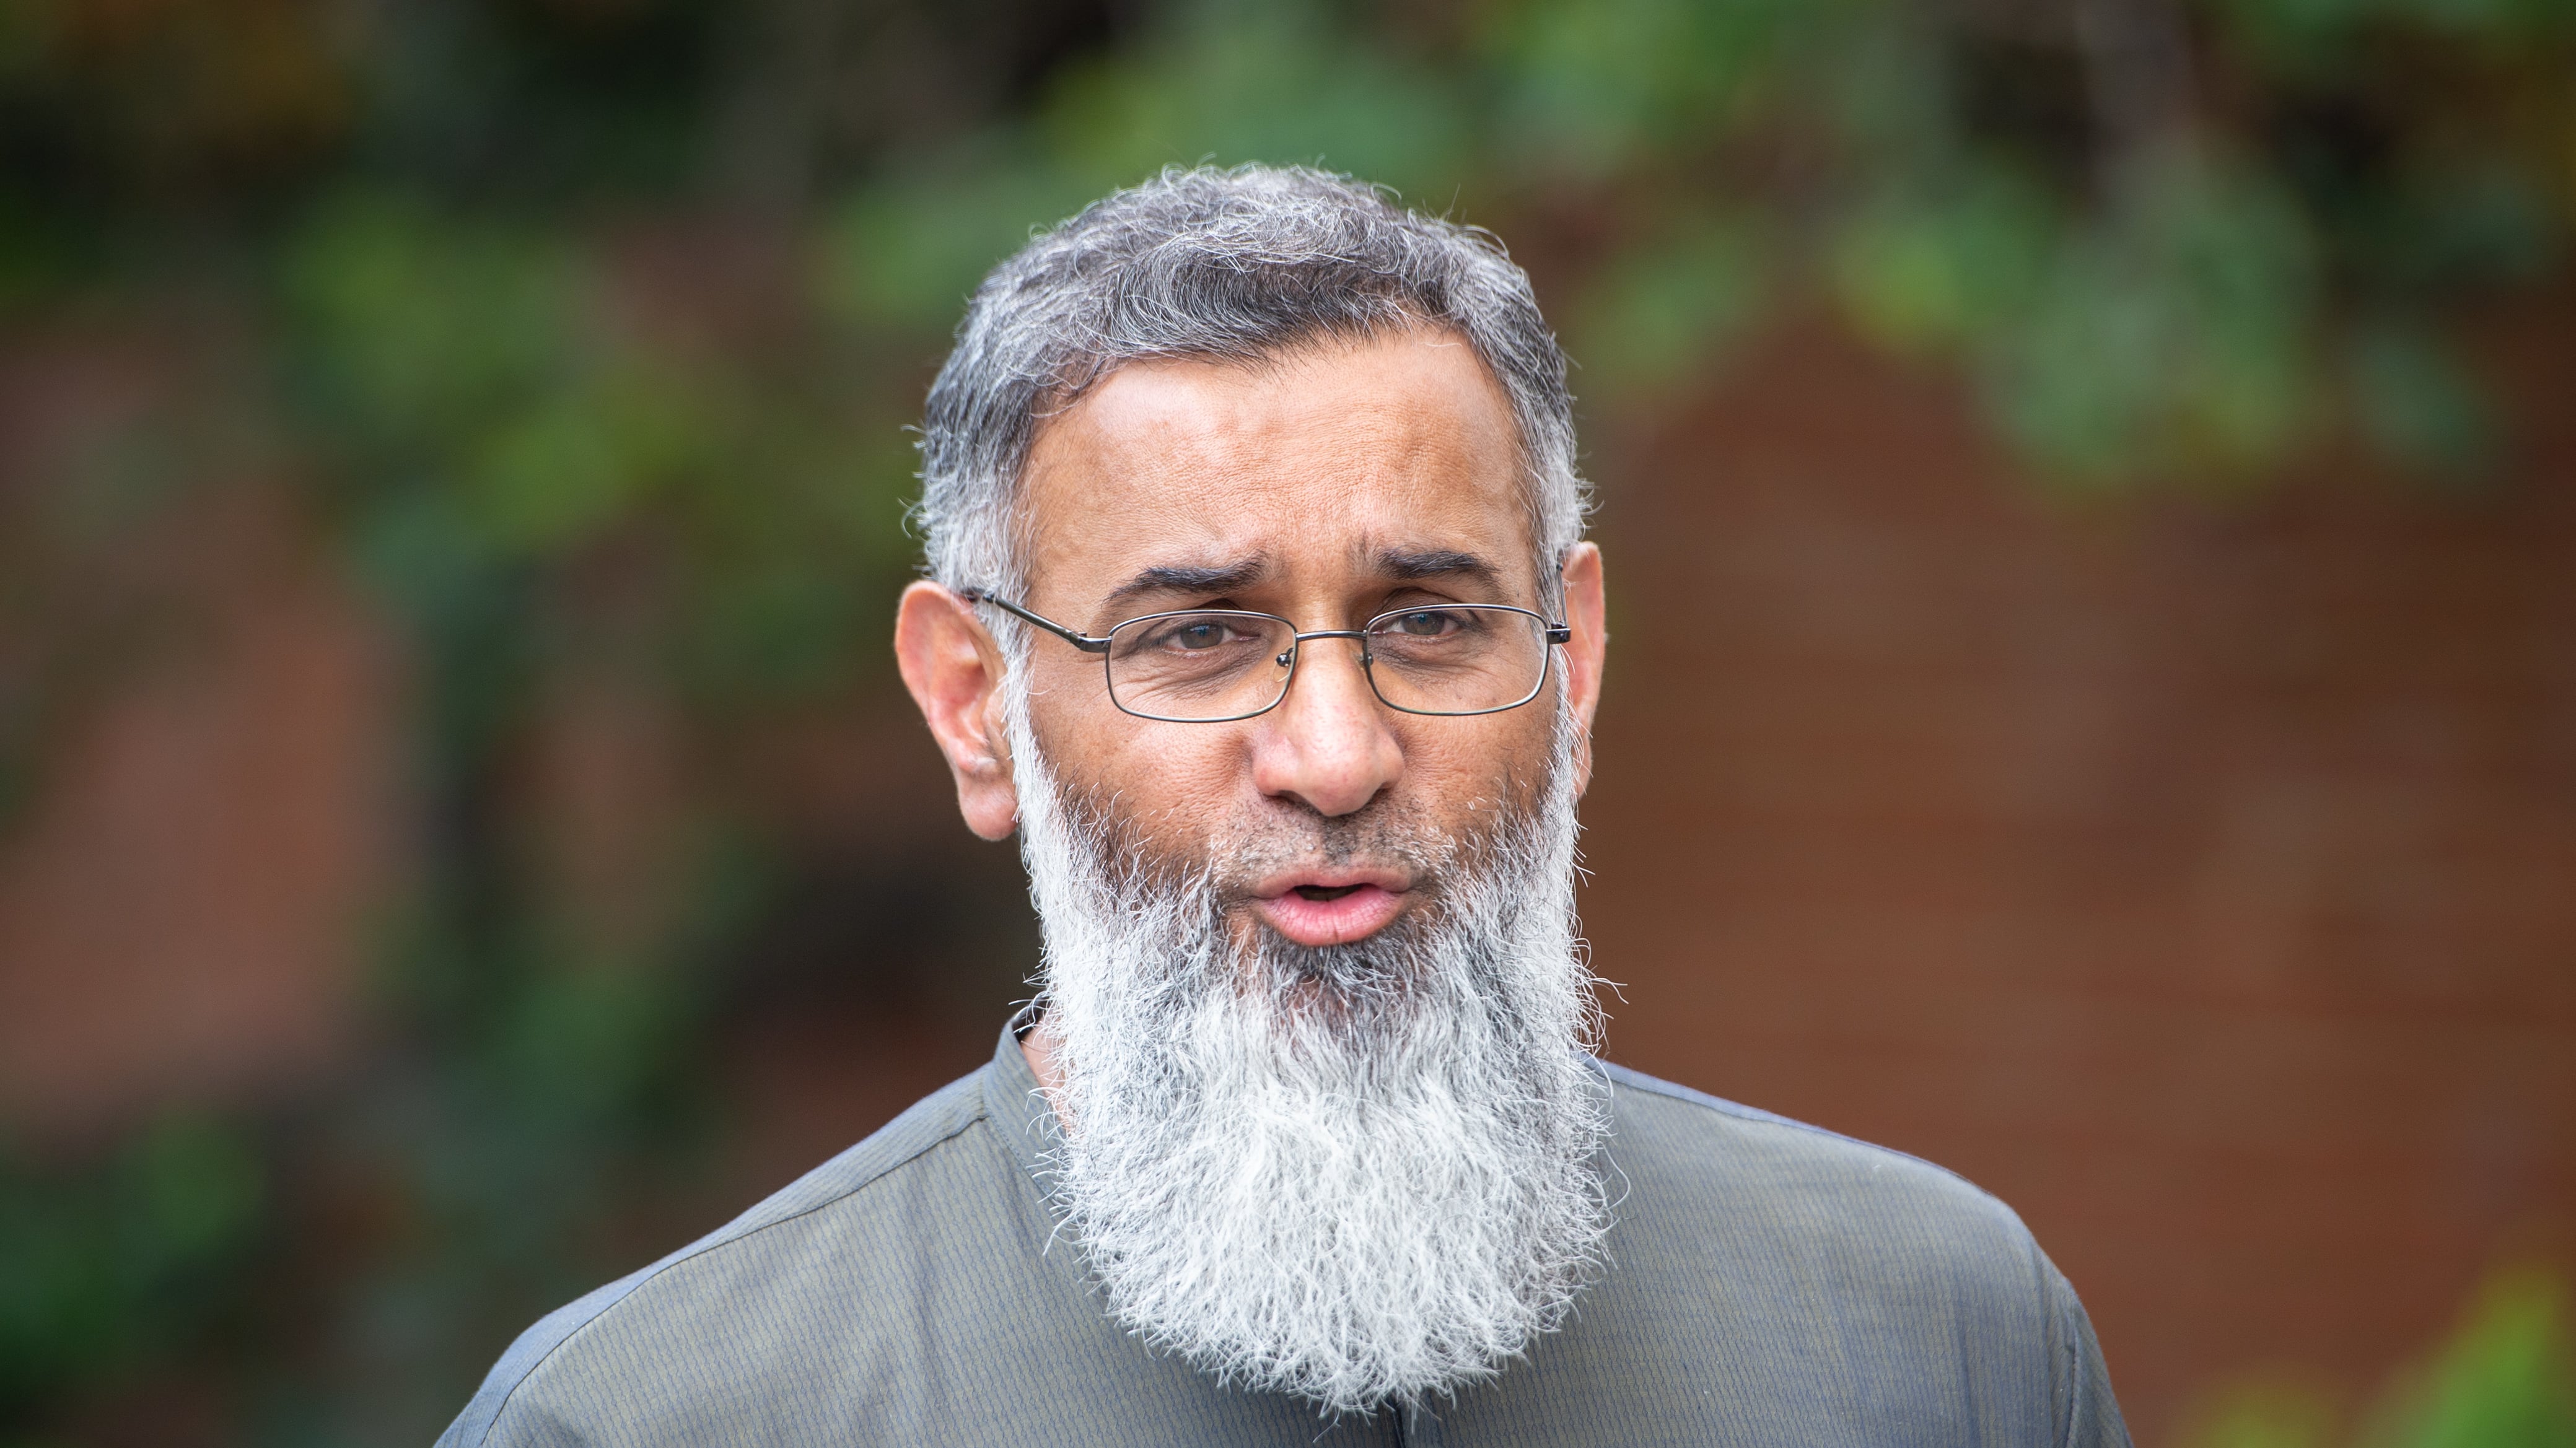 Anjem Choudary has pleaded not guilty to membership of ALM